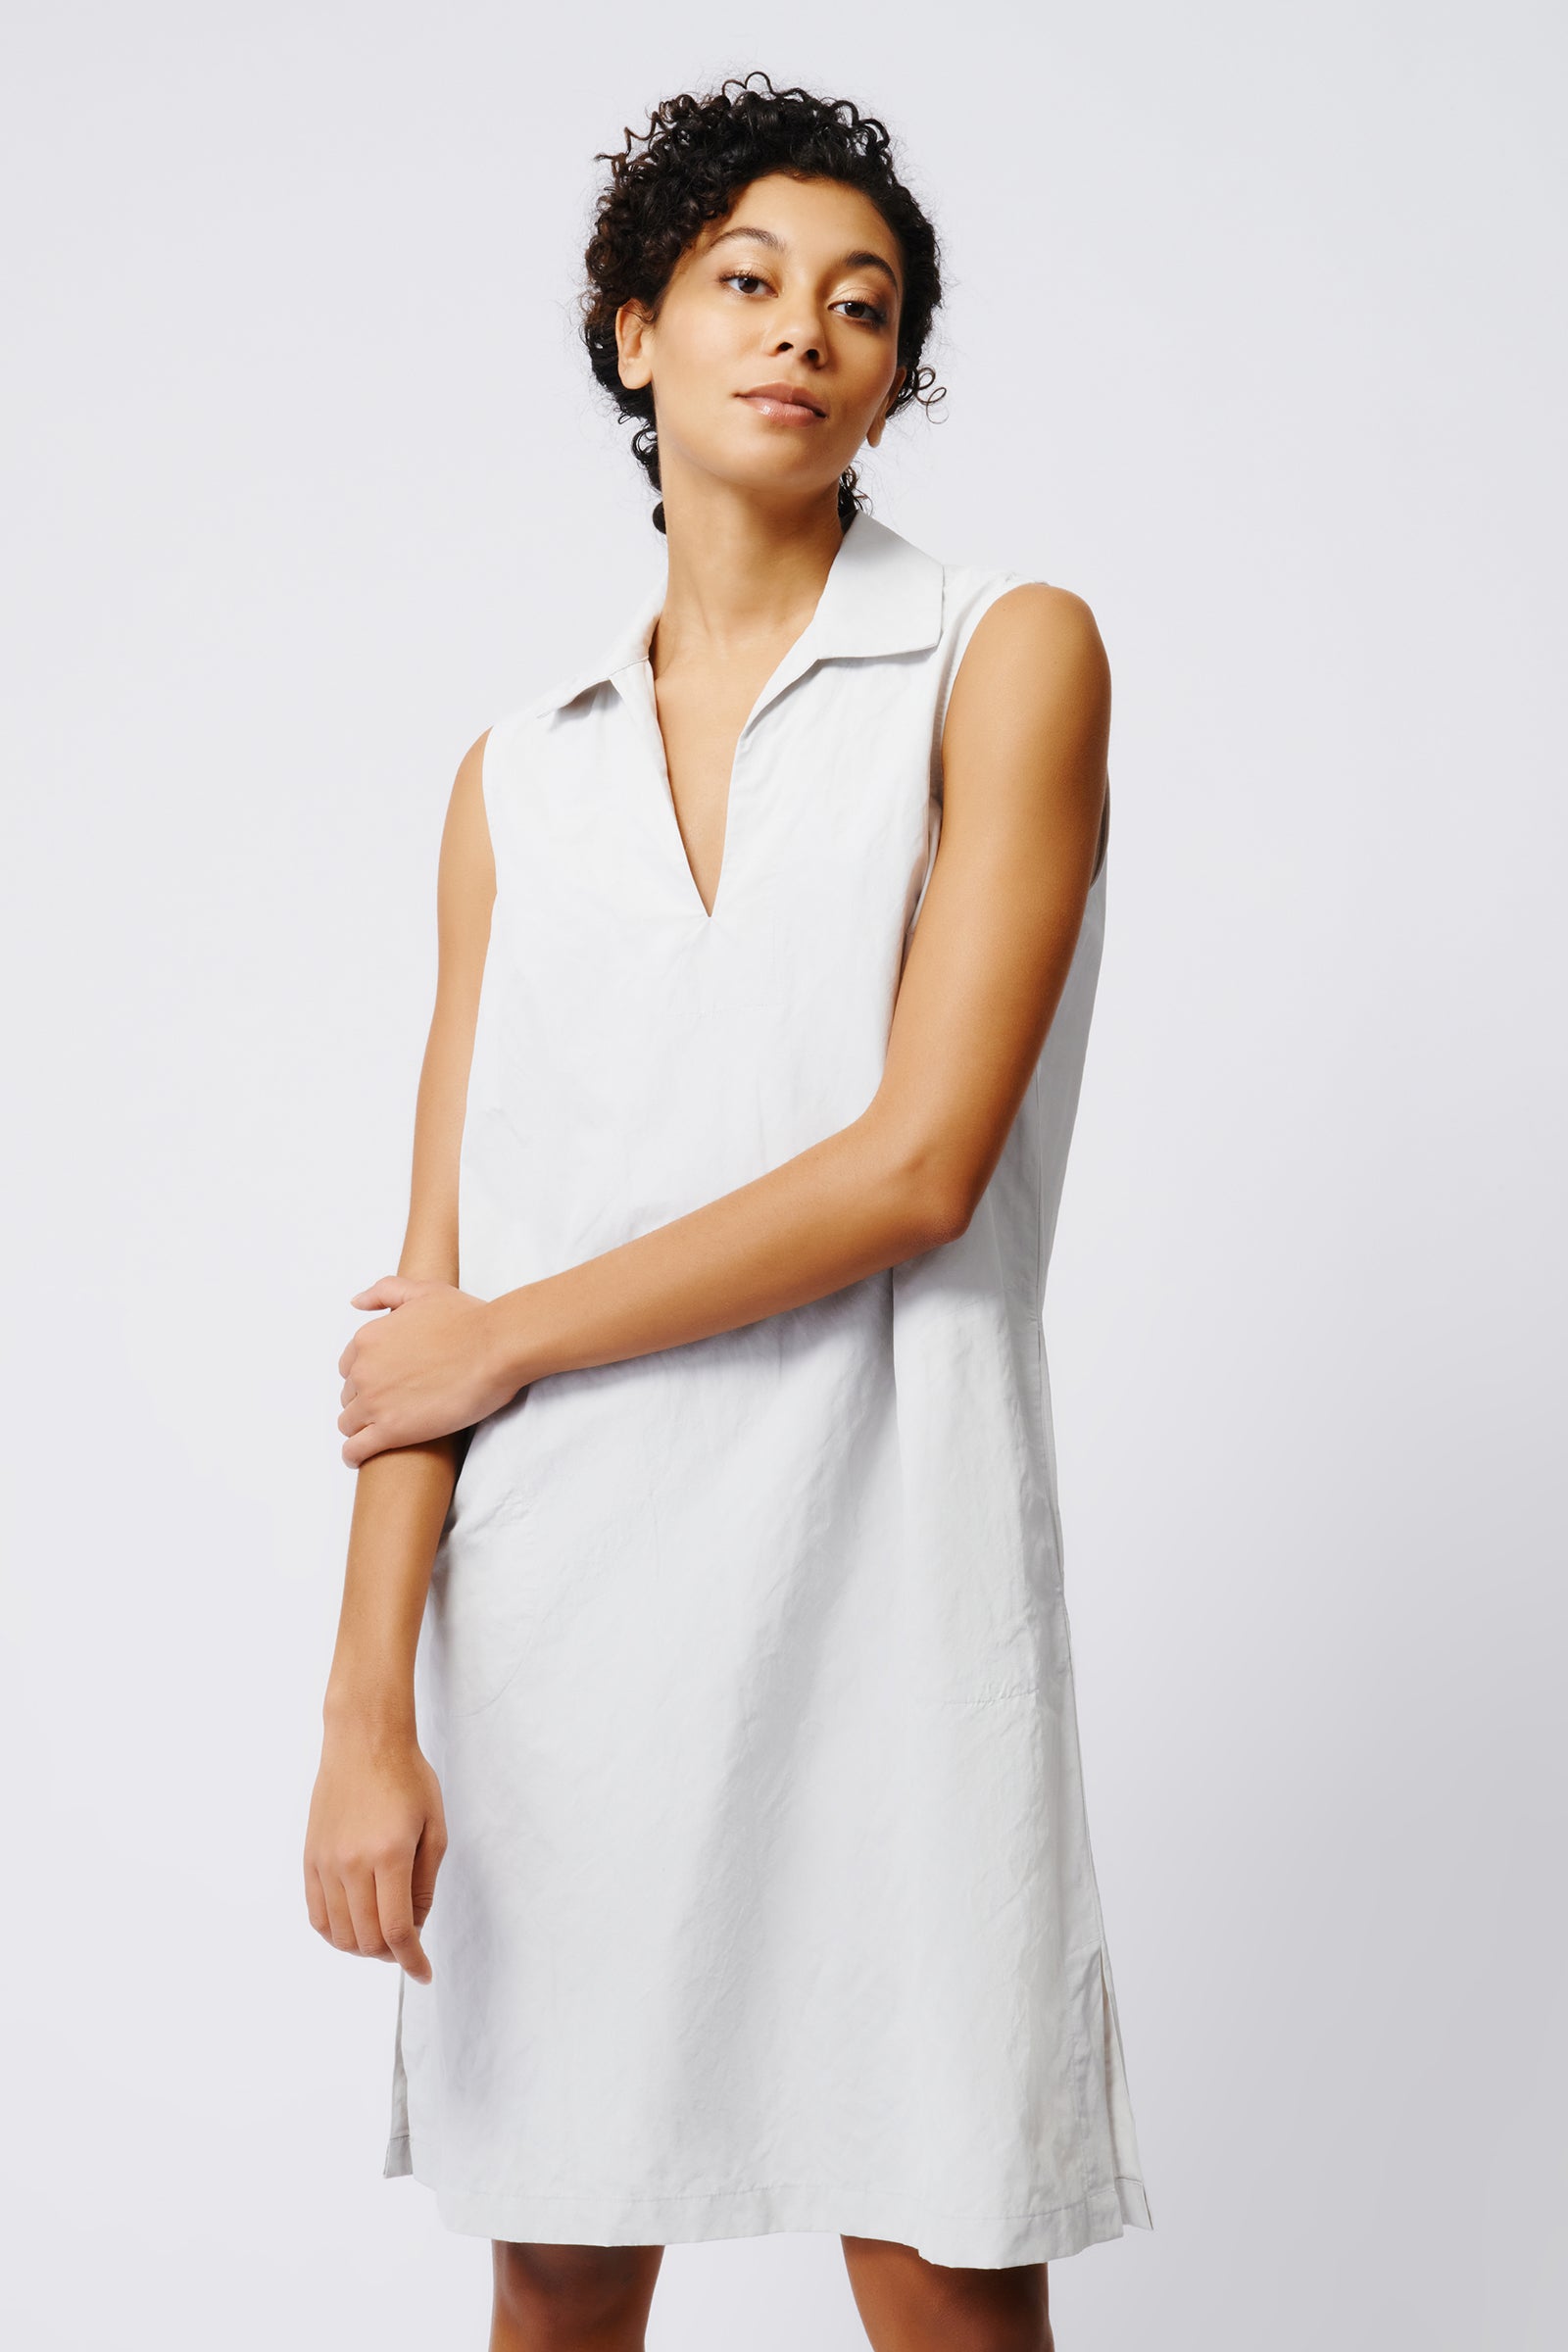 Kal Rieman Eden Sleeveless Collared V Neck Dress in Stone on Model Front View Crop